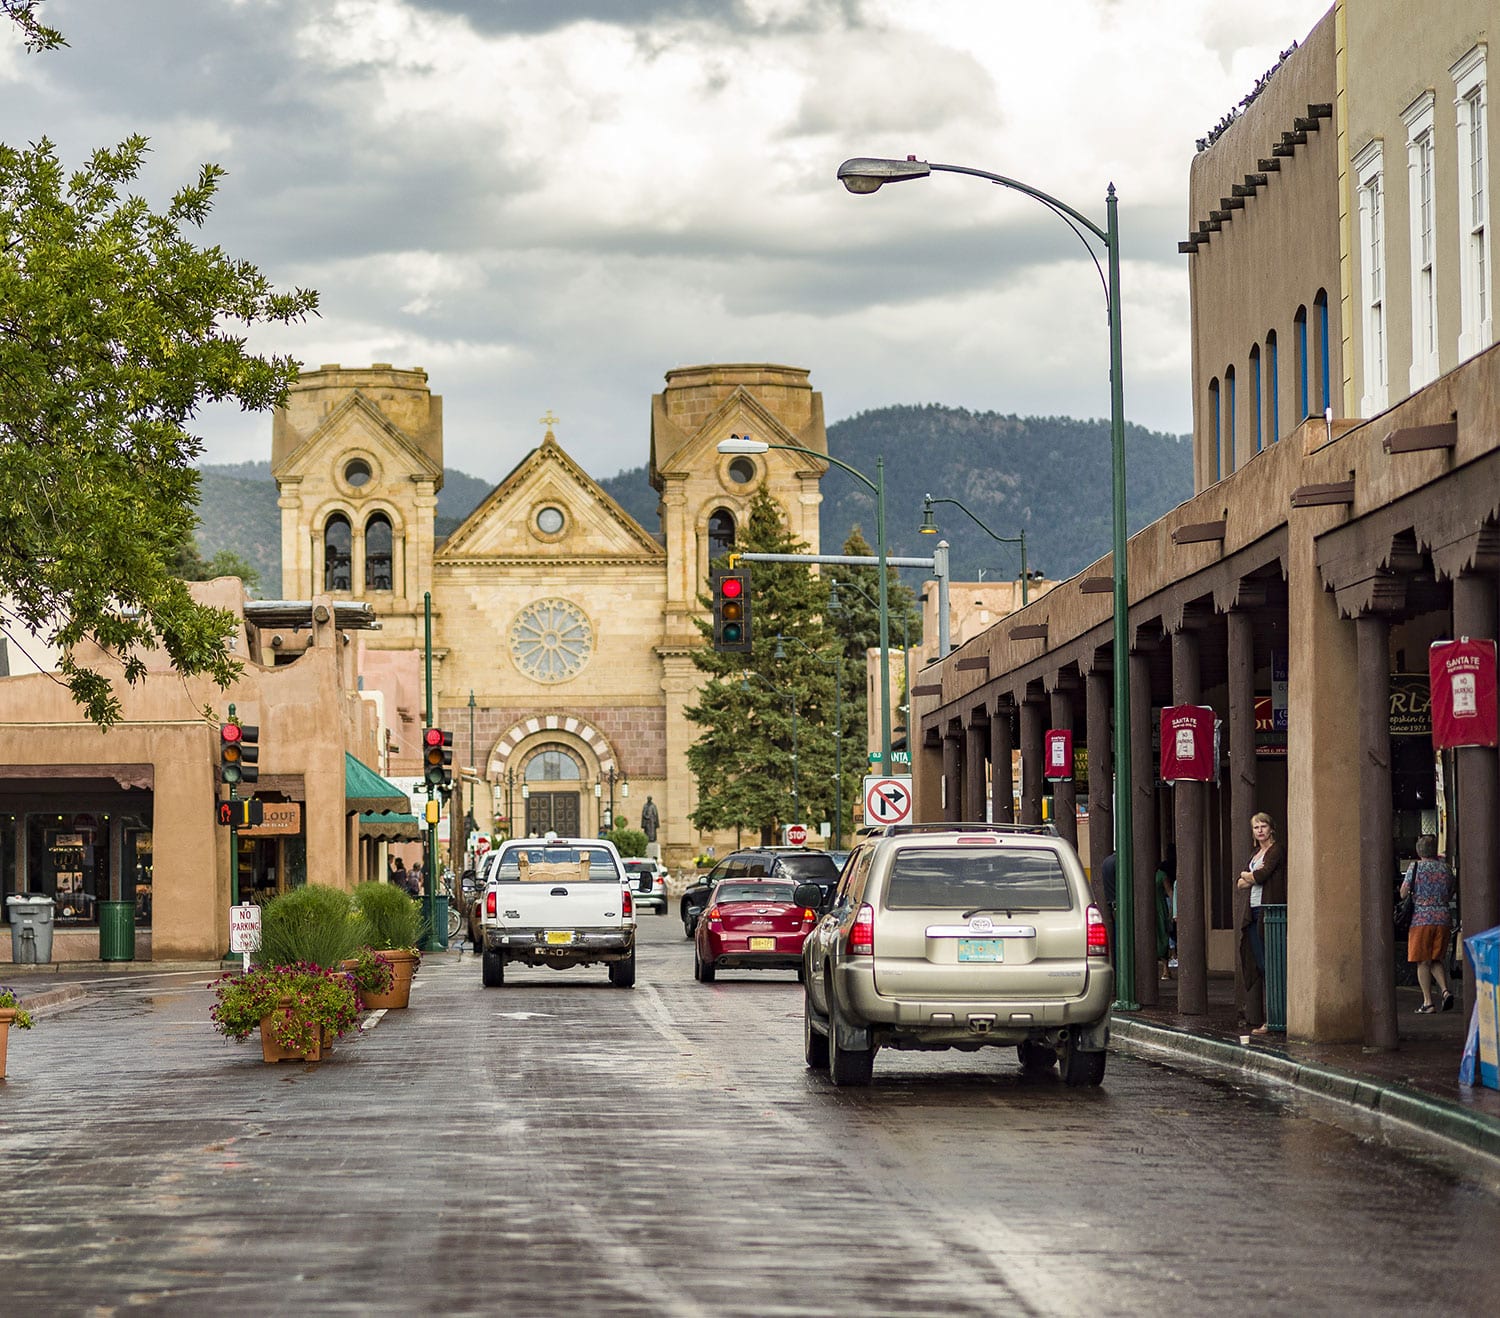 San Francisco Street, Santa Fe, New Mexico with St. Francis Basilica in the background.